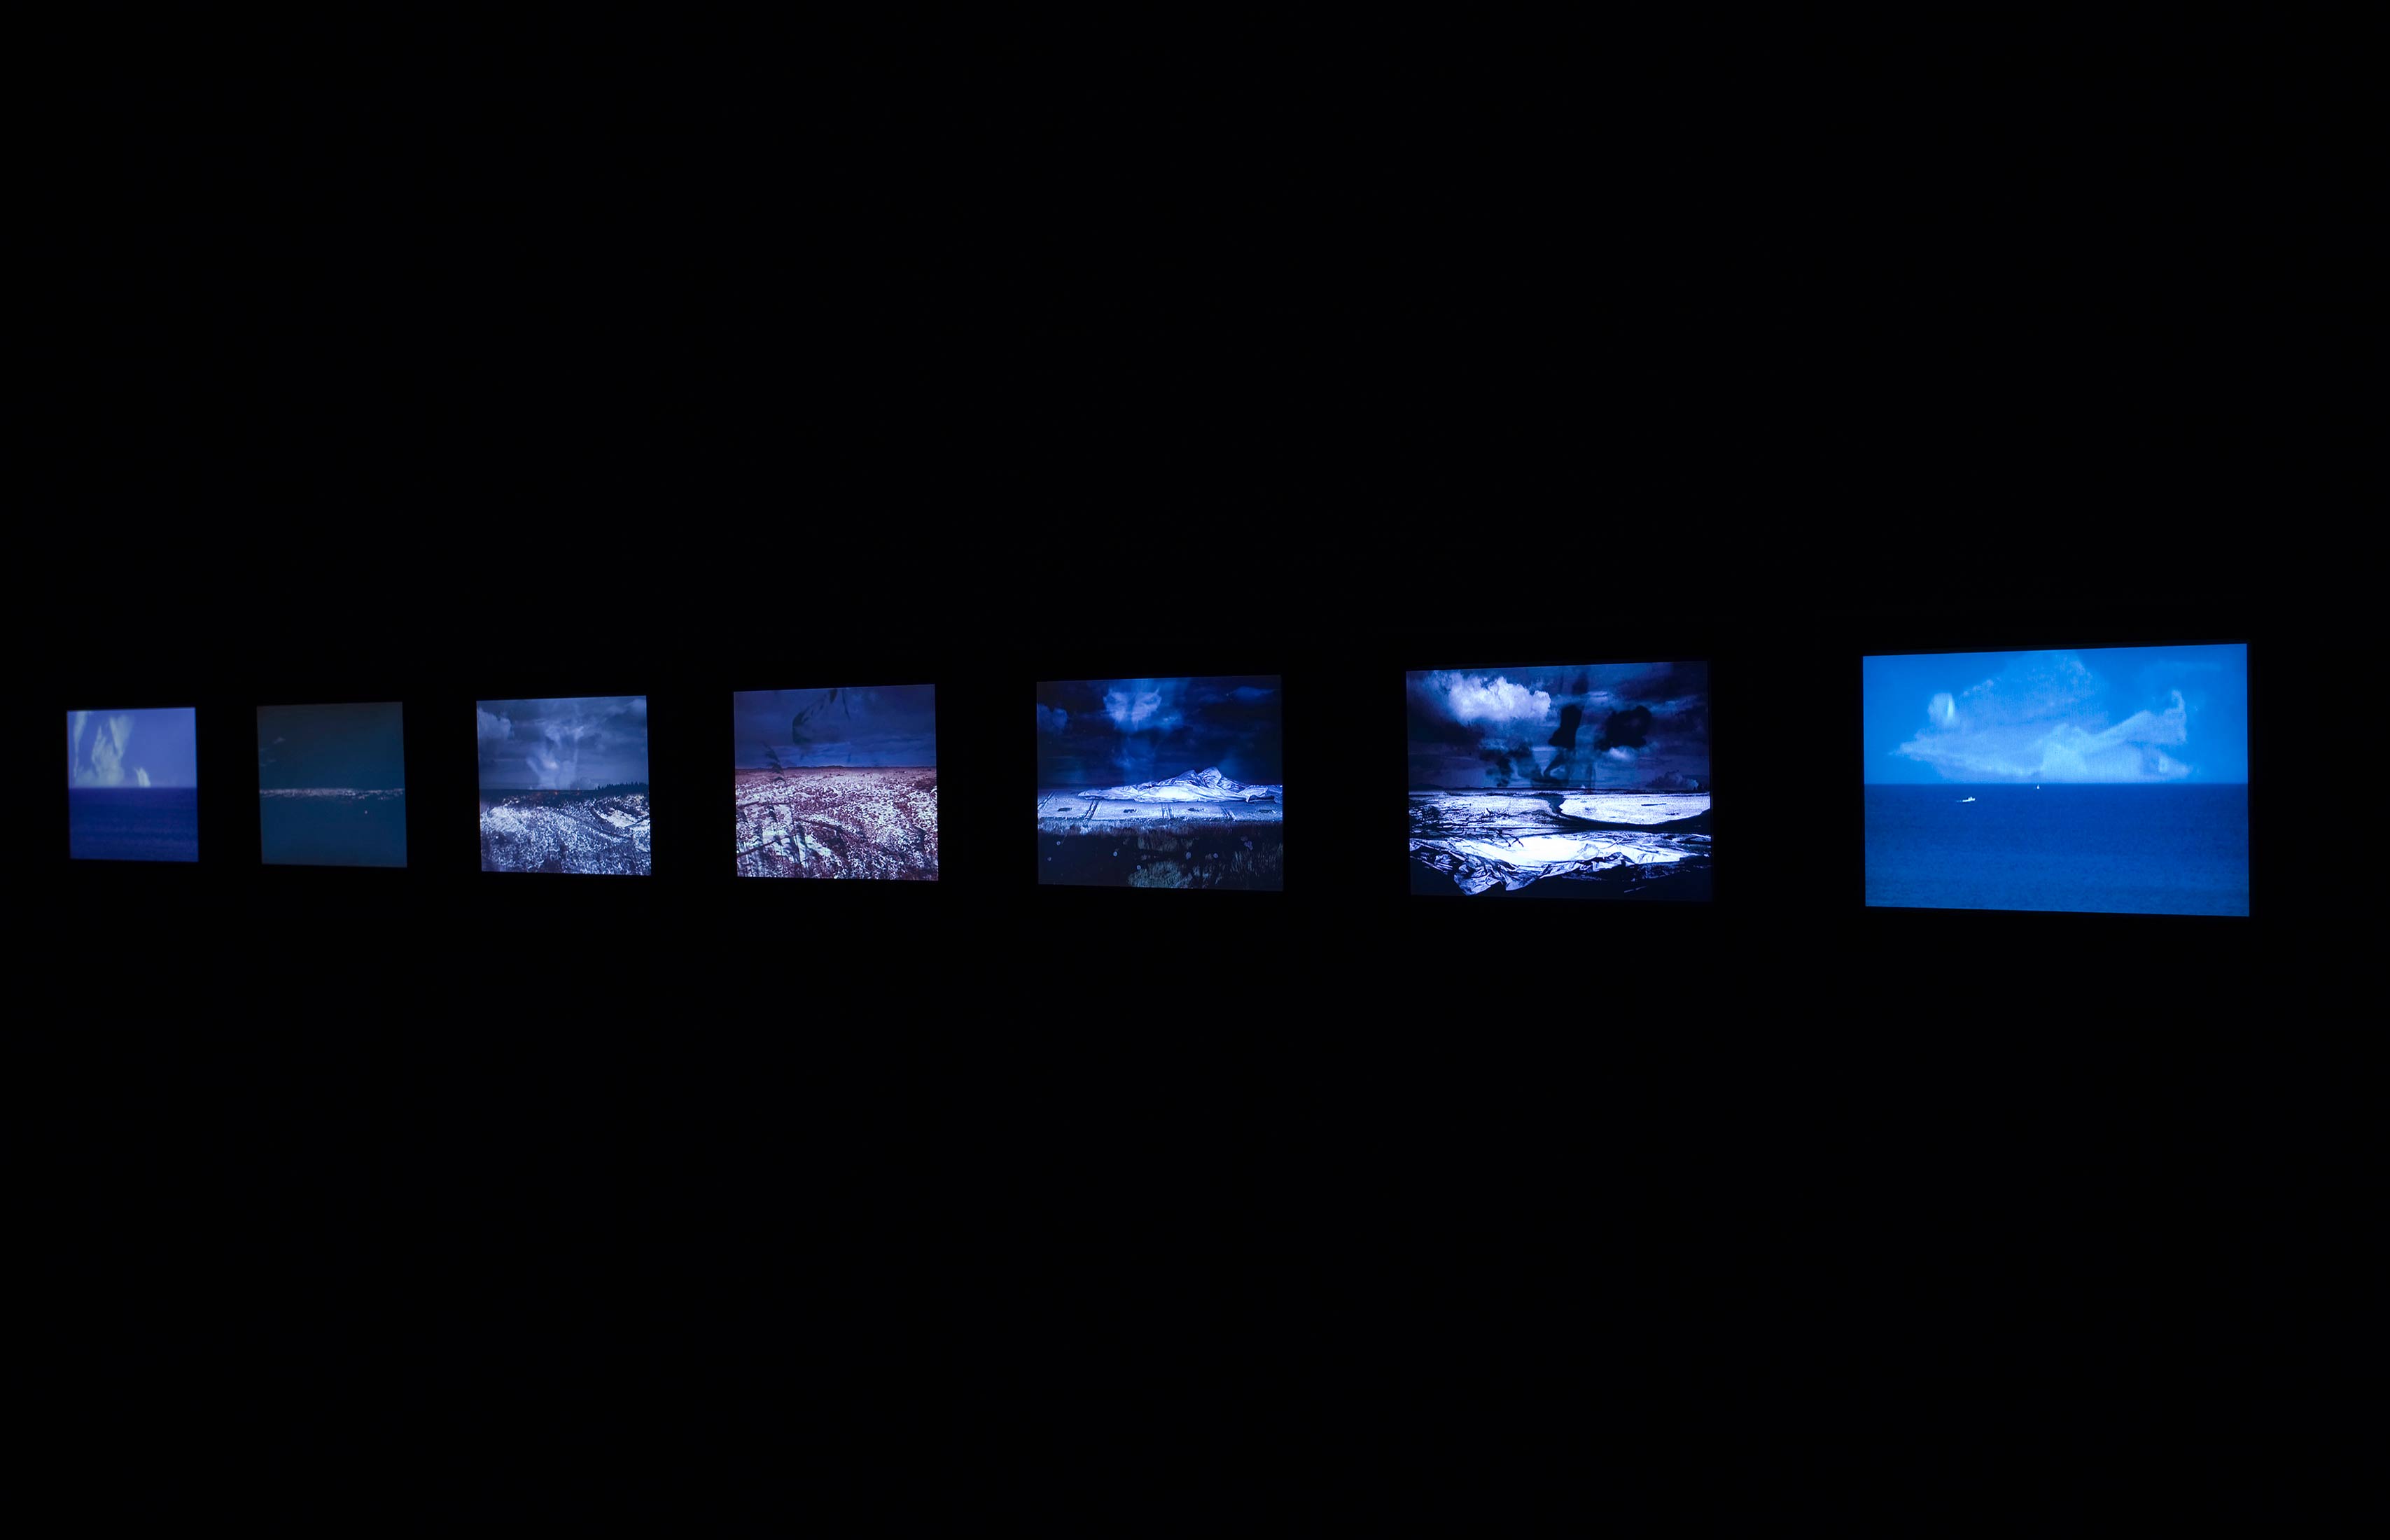 Ailbhe Ní Bhriain 'Palimpsest' seven–screen installation, video, colour, silent, looped; installation view at The Butler Gallery, Kilkenny, Ireland, curated by Anna O'Sullivan, 2008, photo by Denis Mortell.